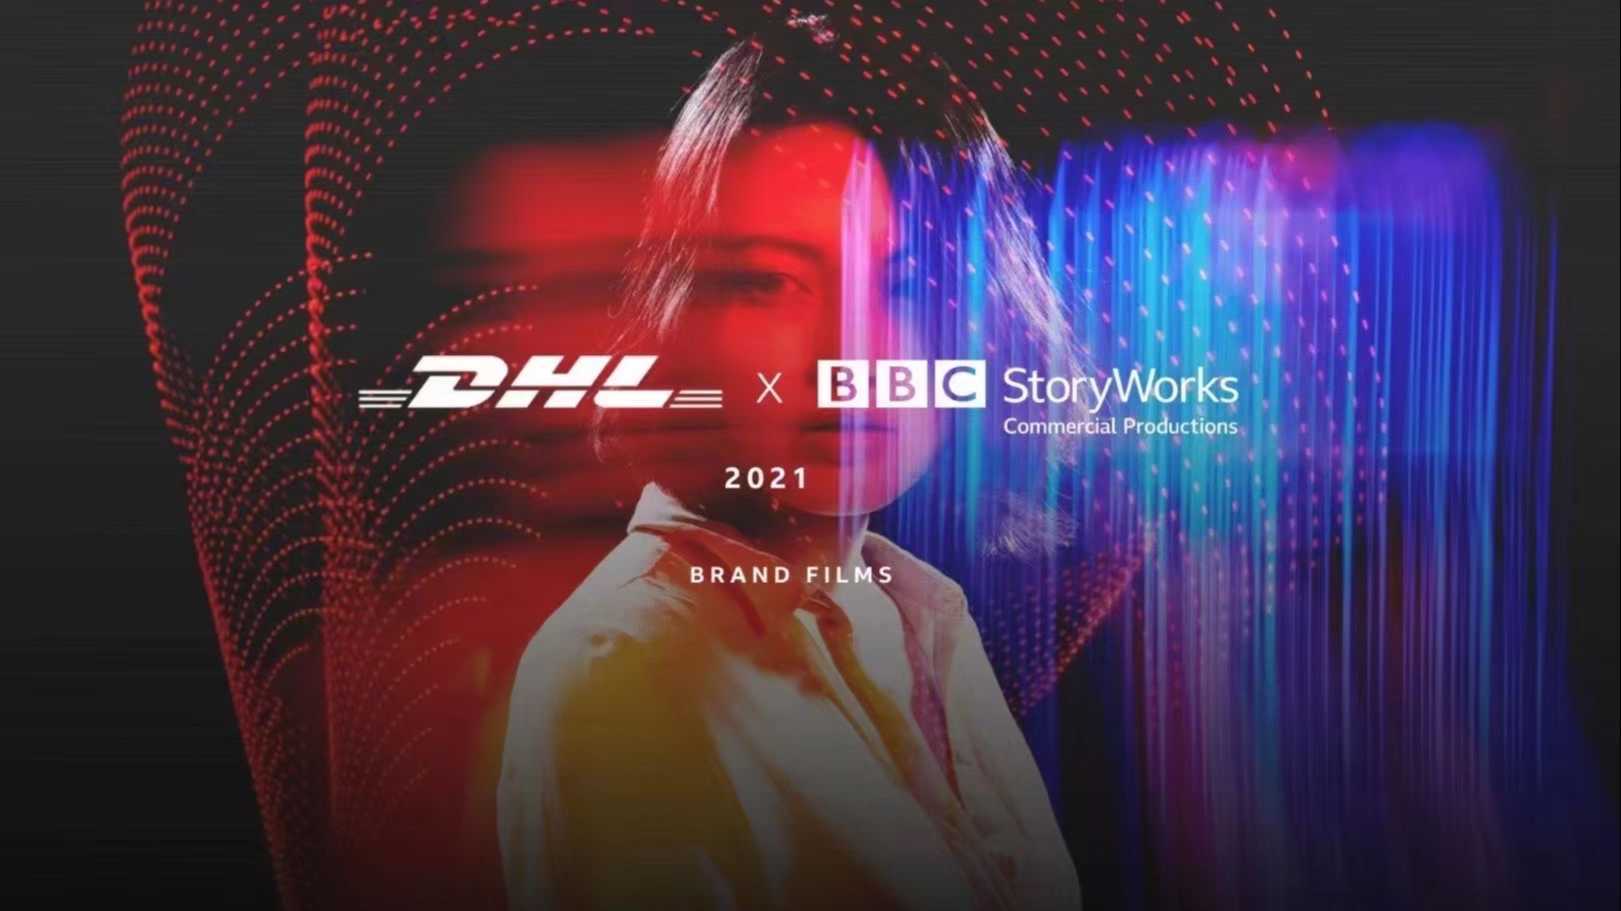 BBC StoryWorks&DHL-Connecting Gamers